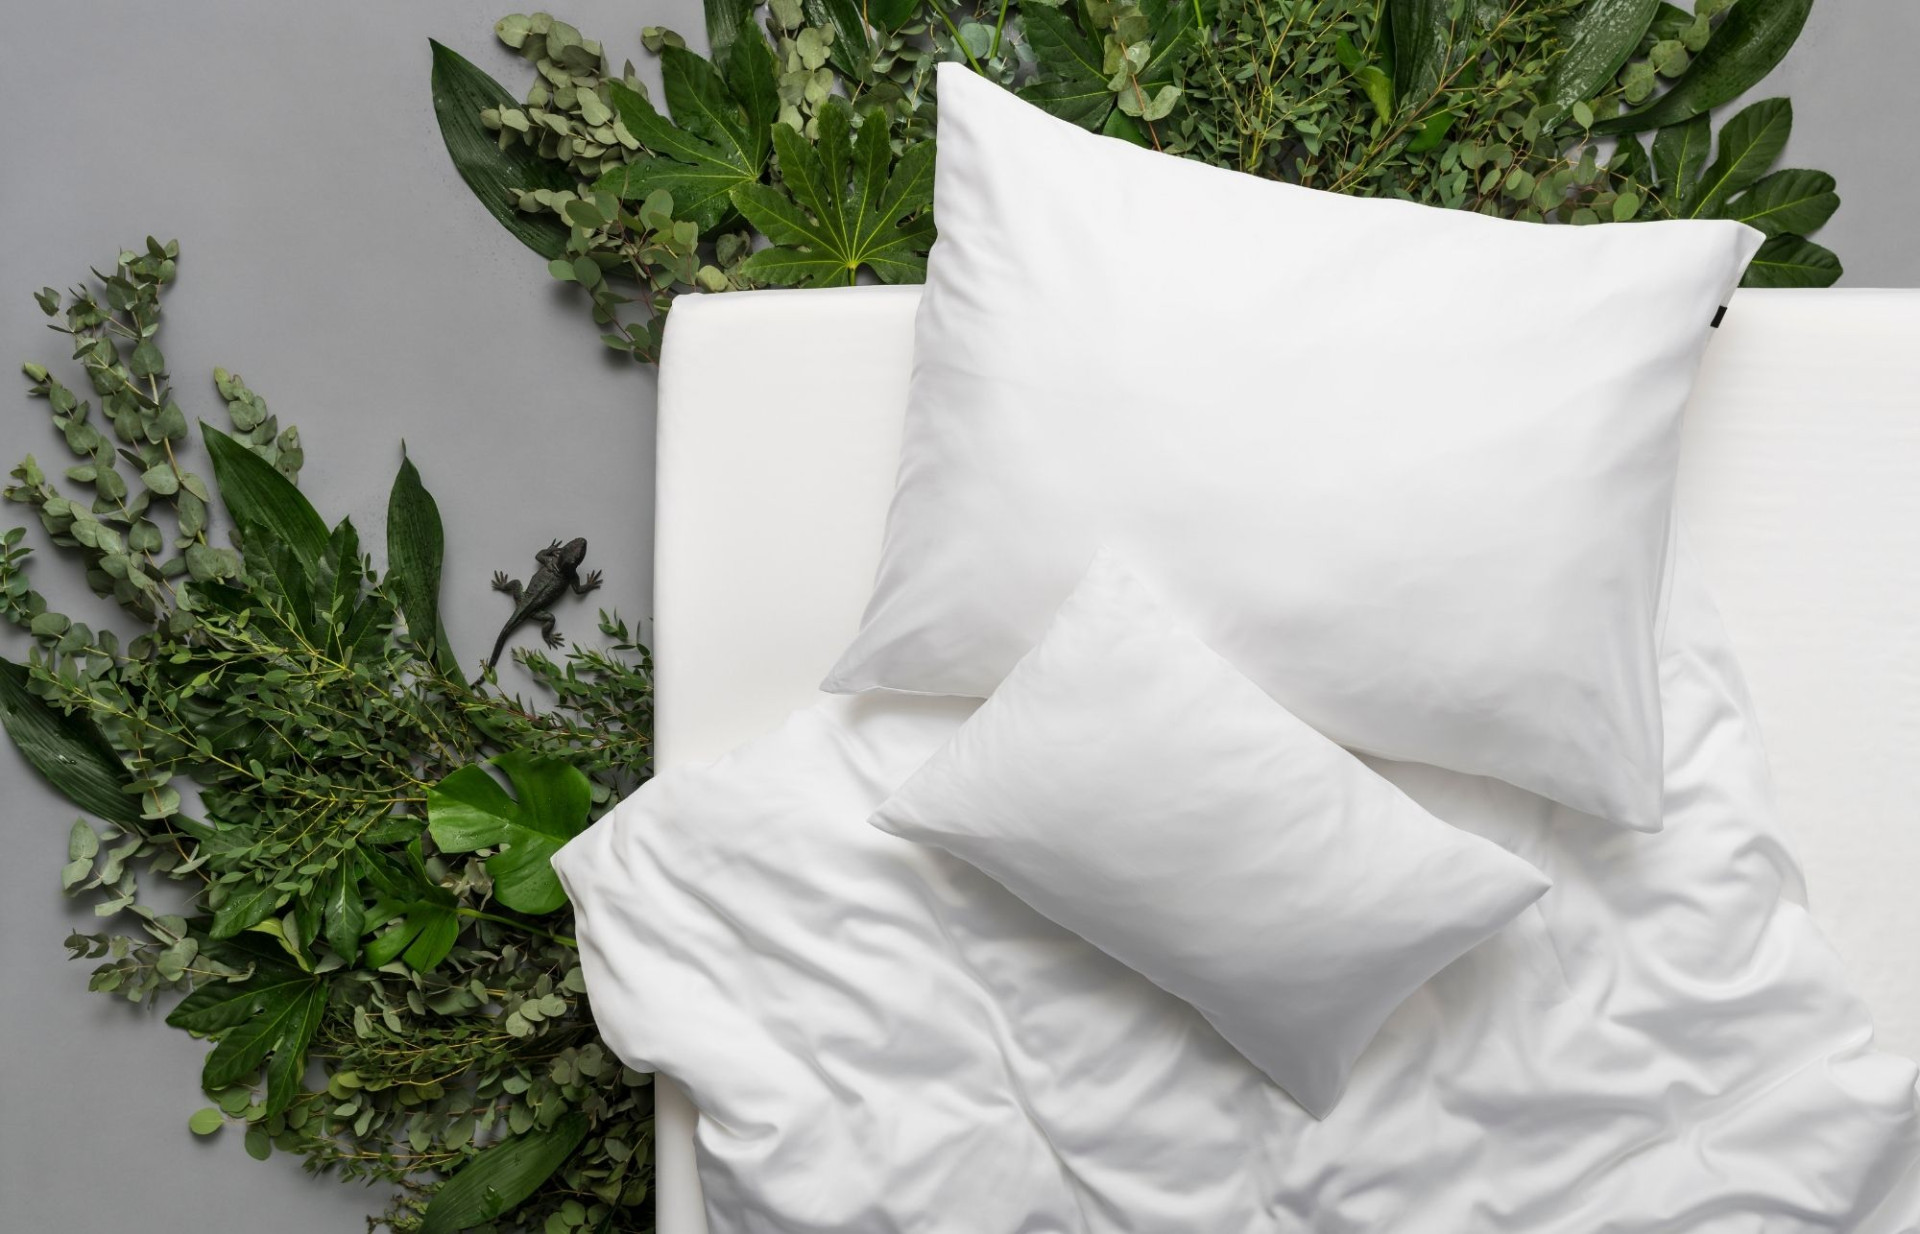 TENCEL ™ Lyocell is the ideal fabric for bed linen. 